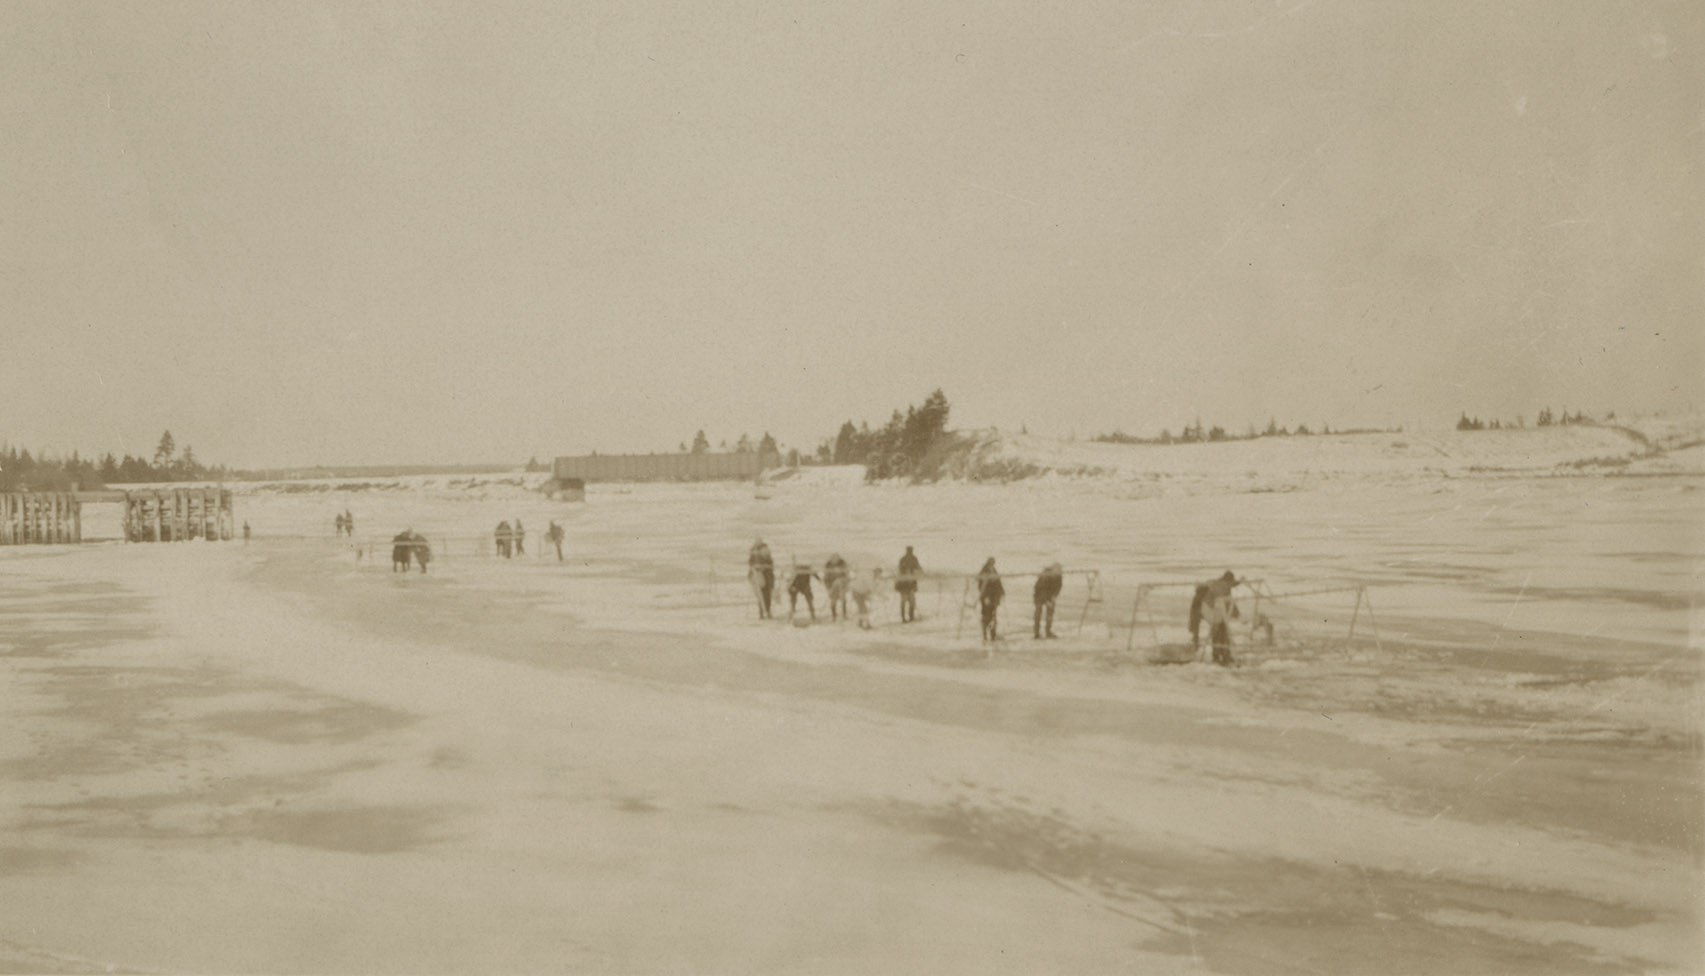 communityalbums - Ice fishing at the head of the village